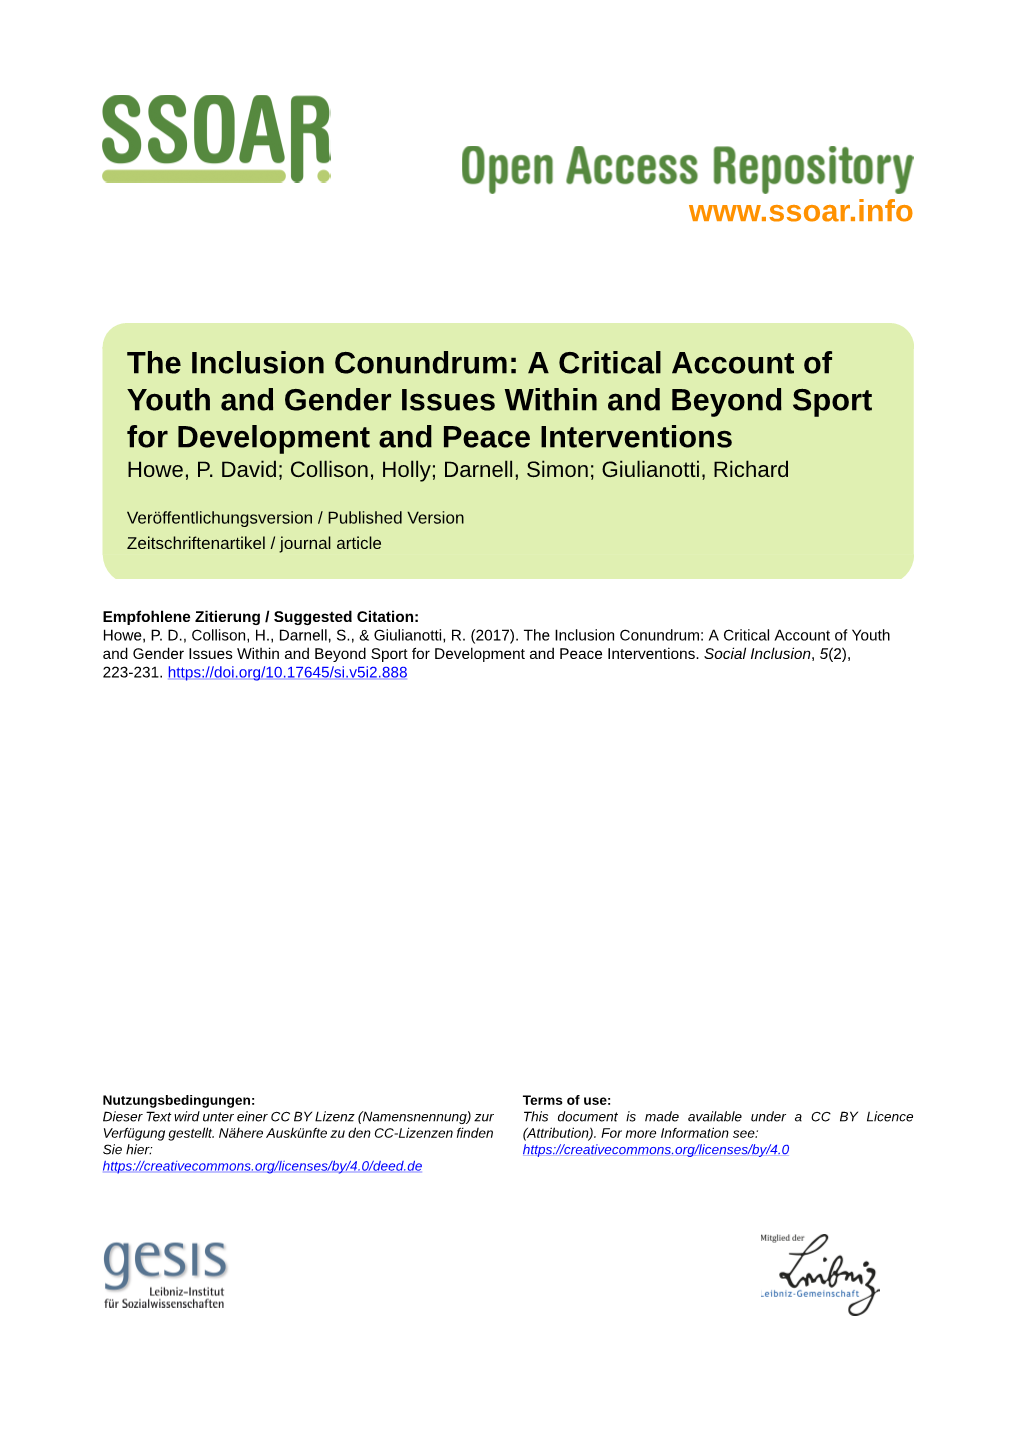 The Inclusion Conundrum: a Critical Account of Youth and Gender Issues Within and Beyond Sport for Development and Peace Interventions Howe, P